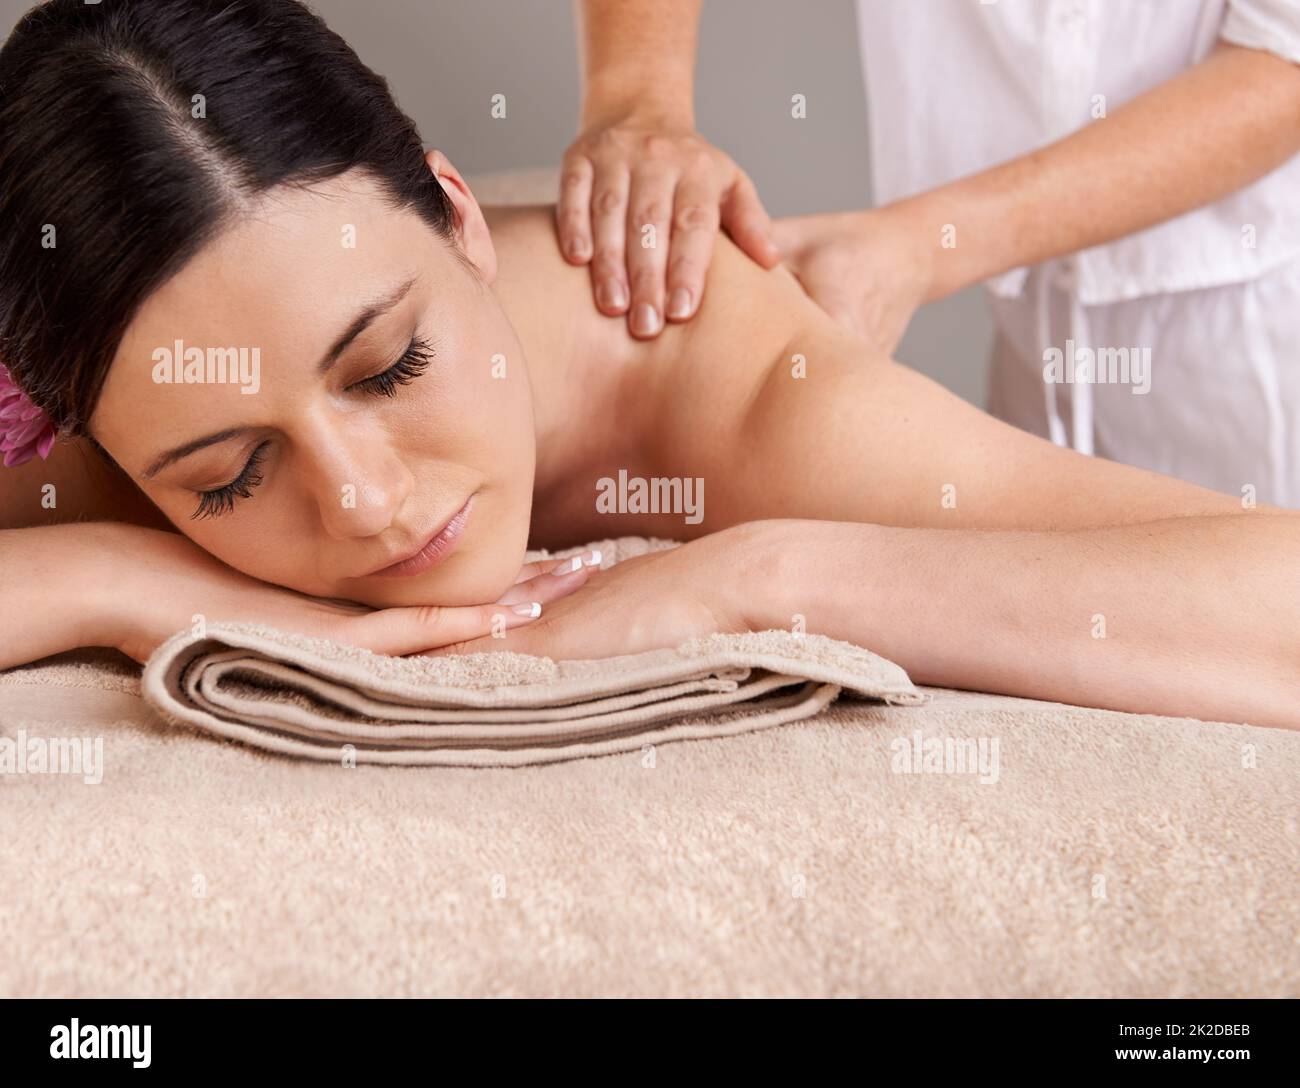 Taking time out for herself. Relaxed young woman receiving a massage at a day spa. Stock Photo